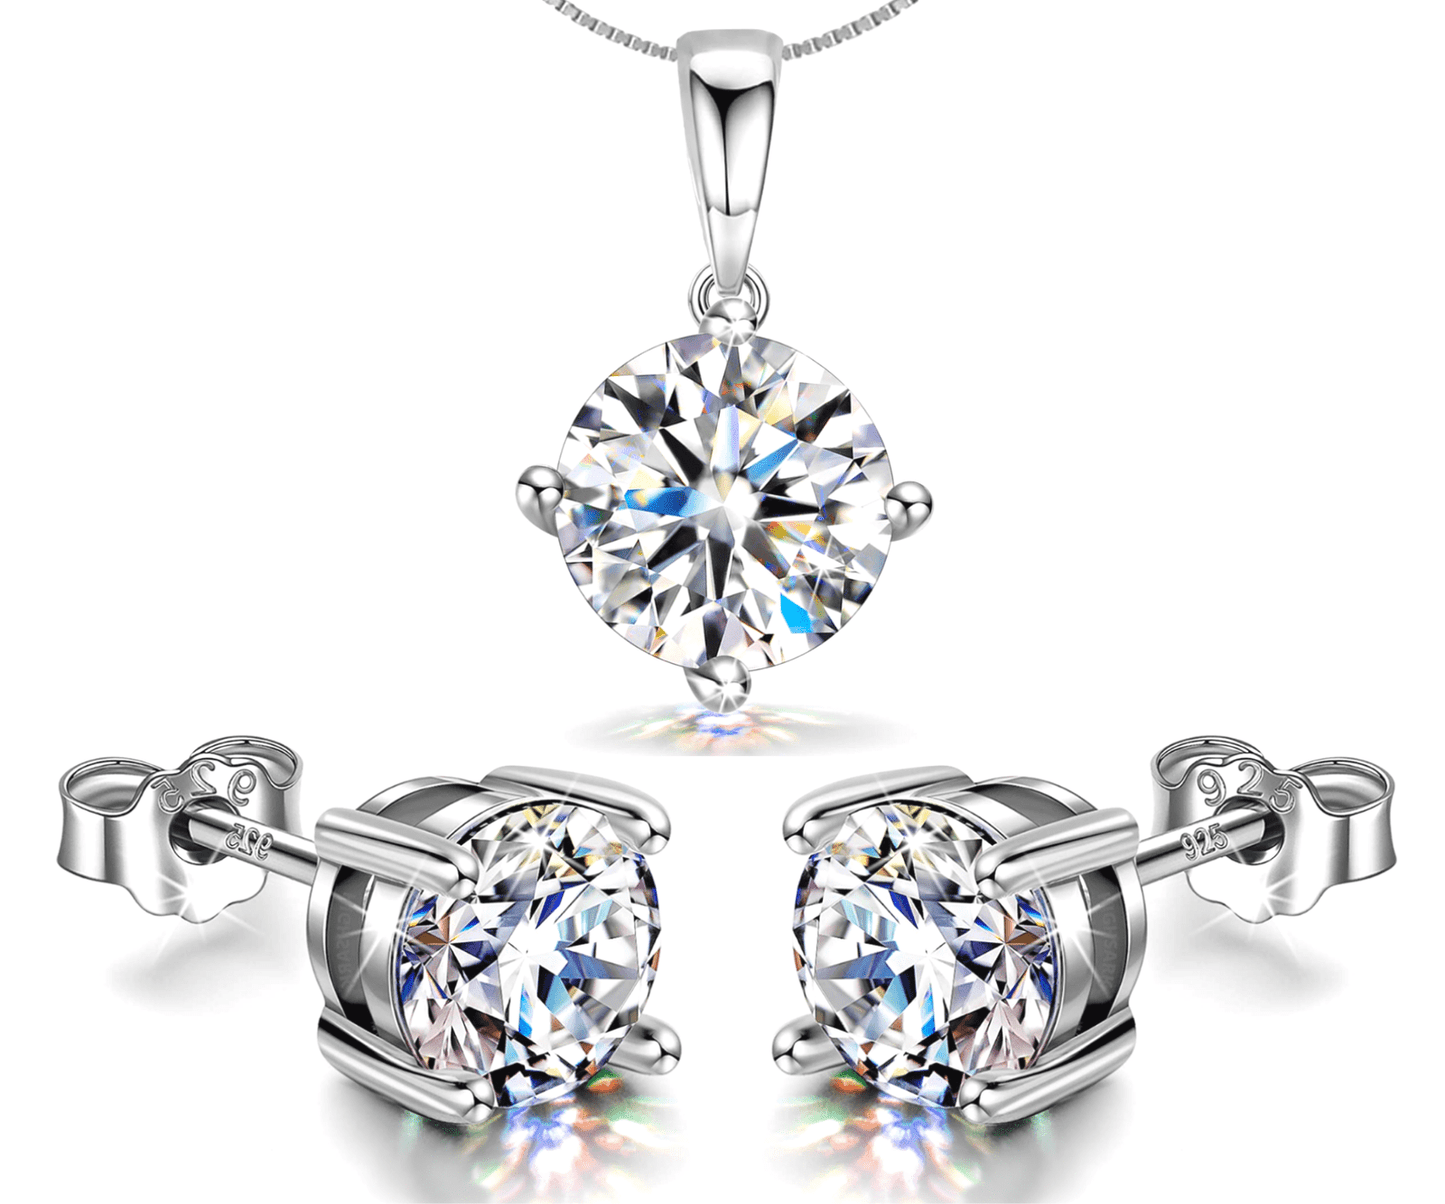 Solitaire Set - Round Earrings, Pendant & Chain in 92.5 Silver embellished with Swarovski Zirconia